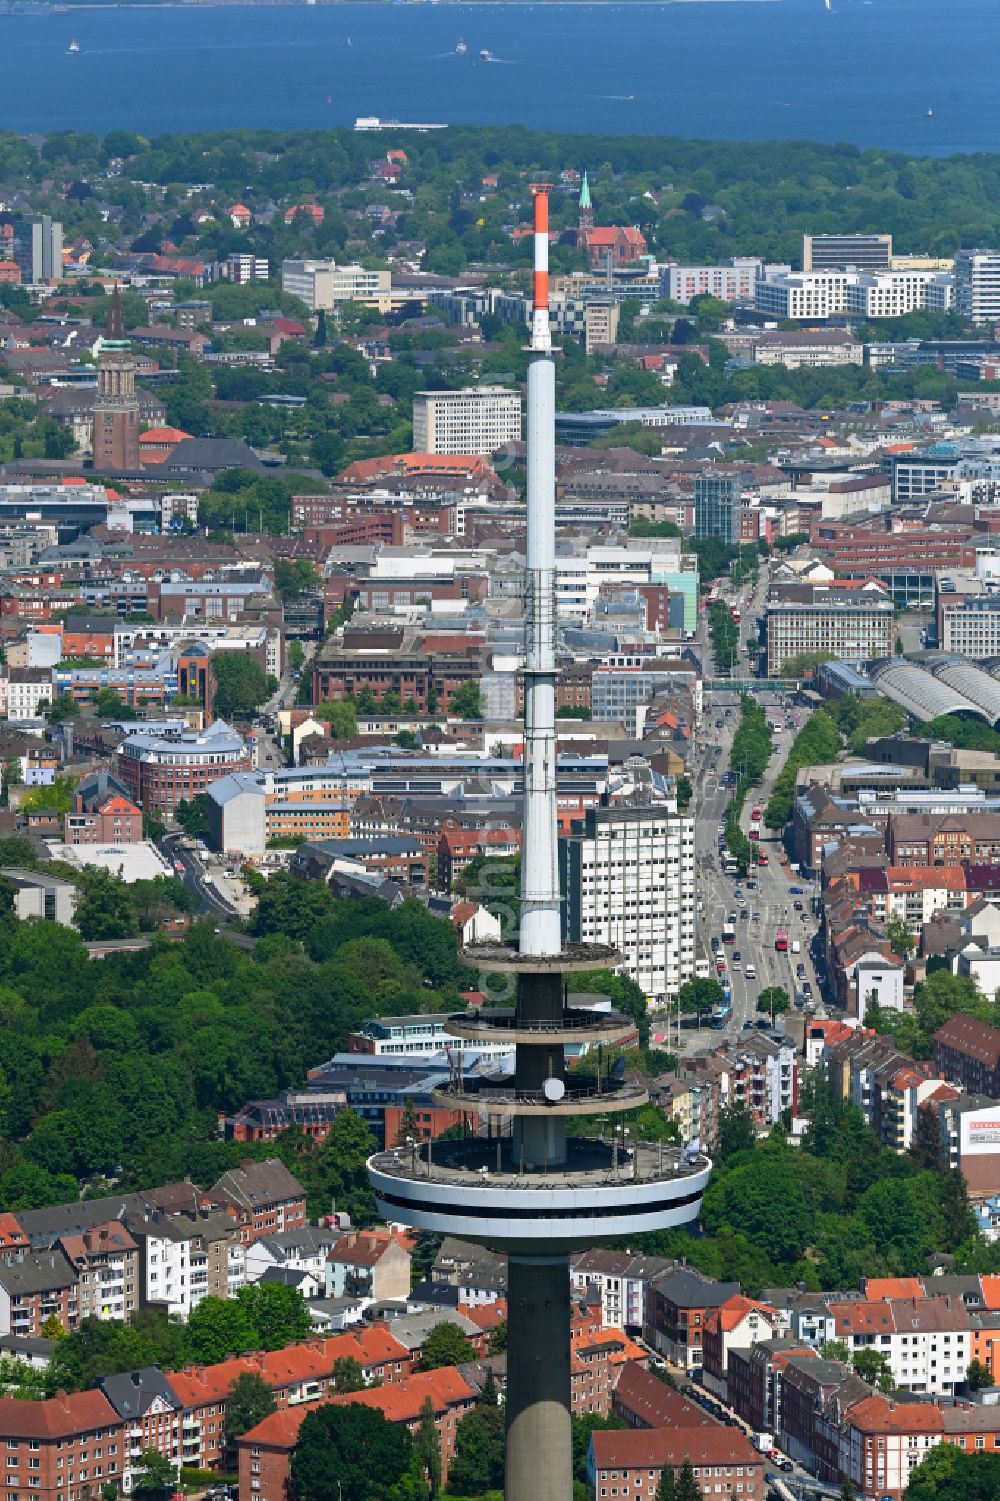 Kiel from above - Telecommunications tower in the Vieburger Gehoelz in Kiel in the federal state of Schleswig-Holstein